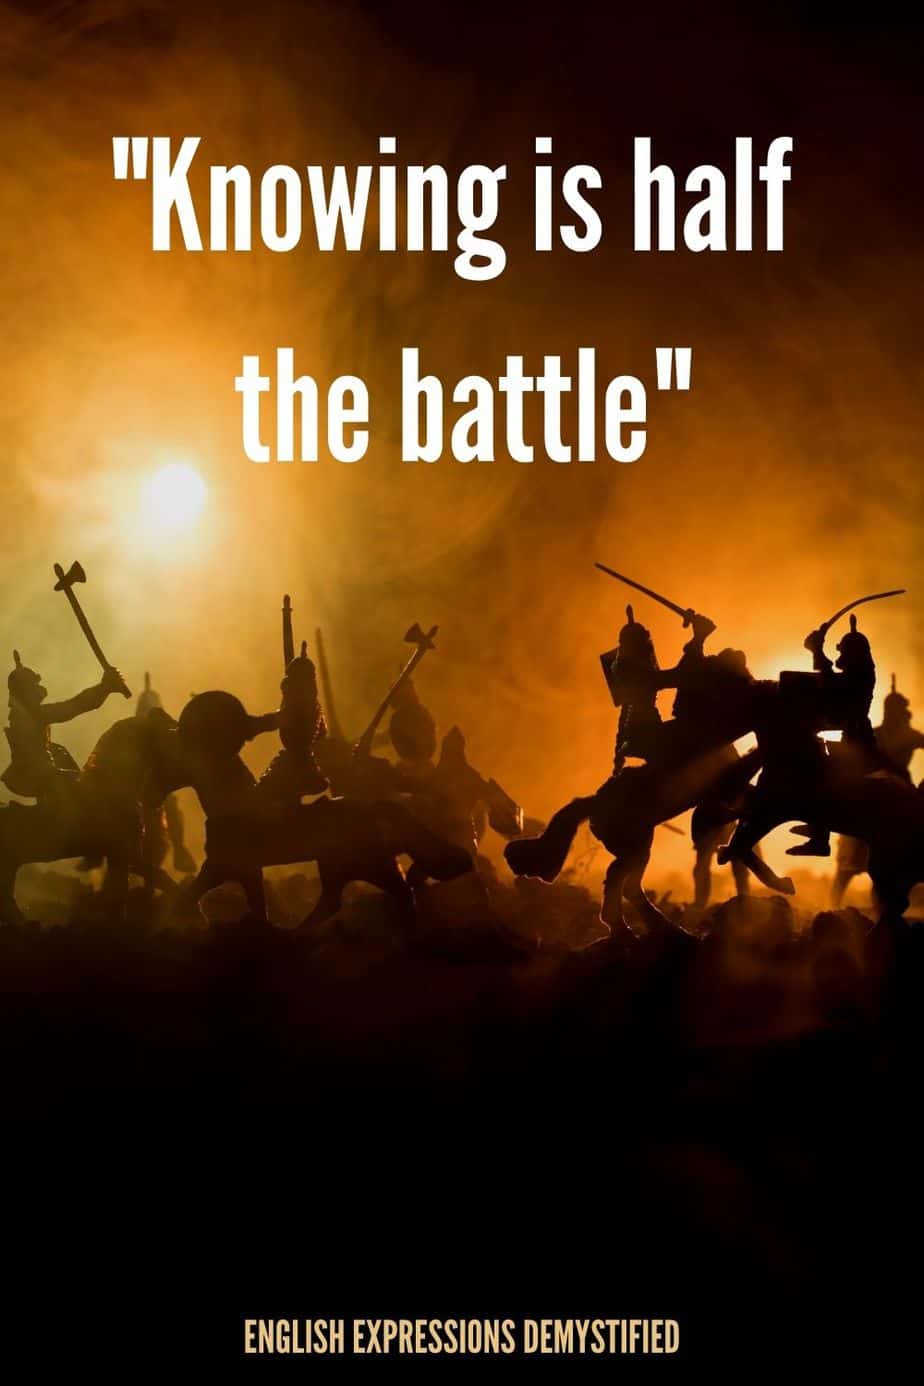 Knowing is half the battle Meaning